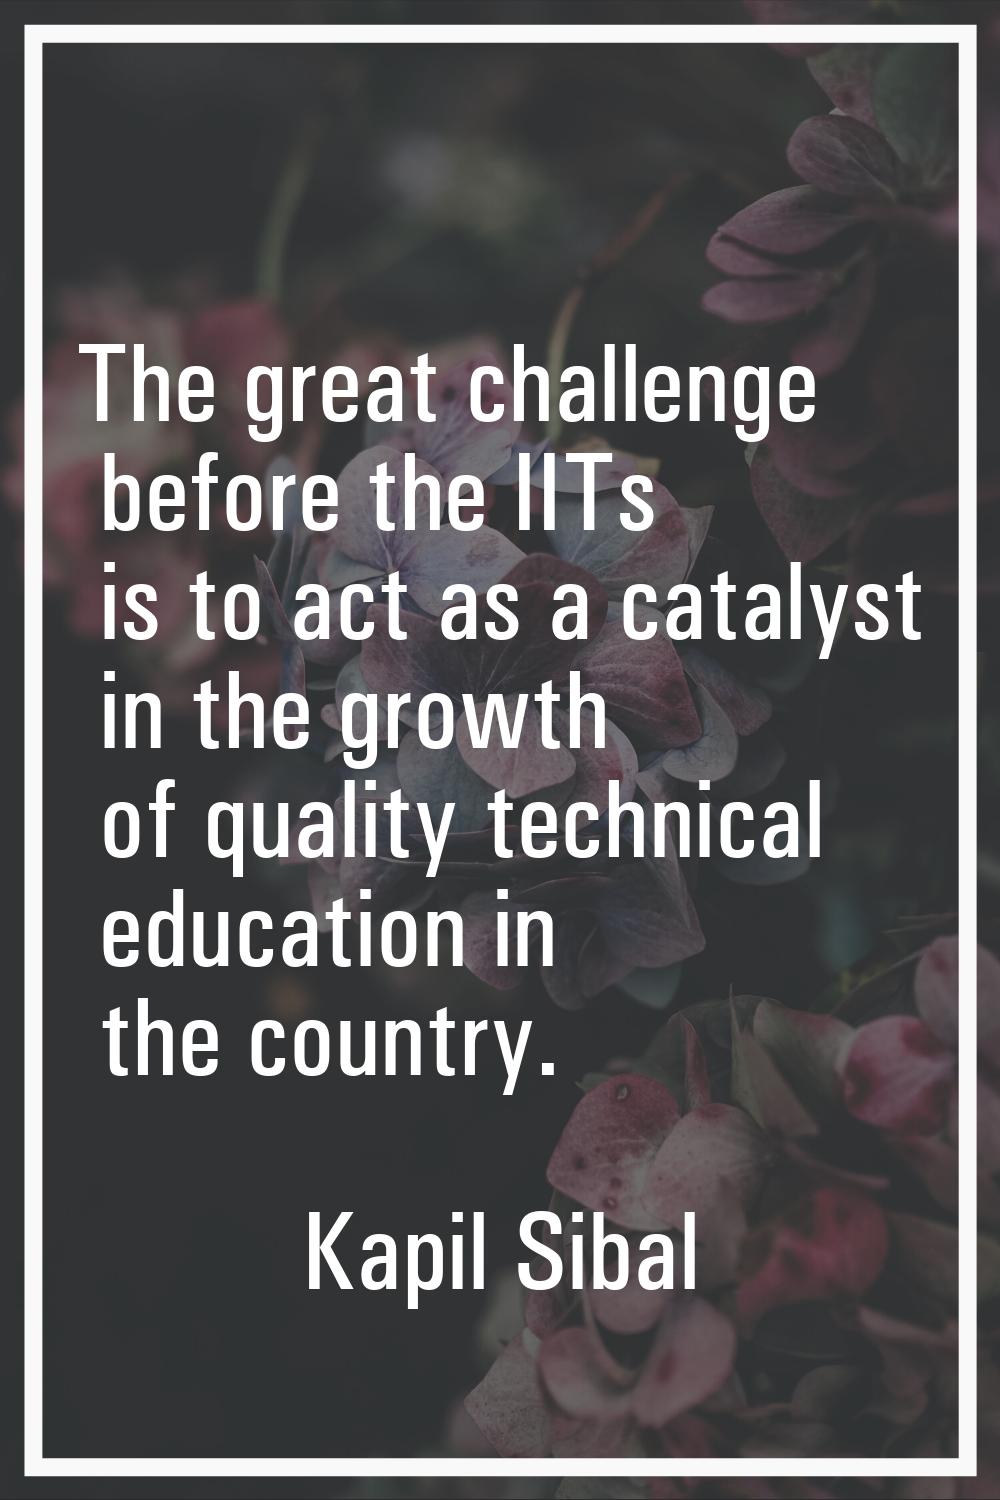 The great challenge before the IITs is to act as a catalyst in the growth of quality technical educ